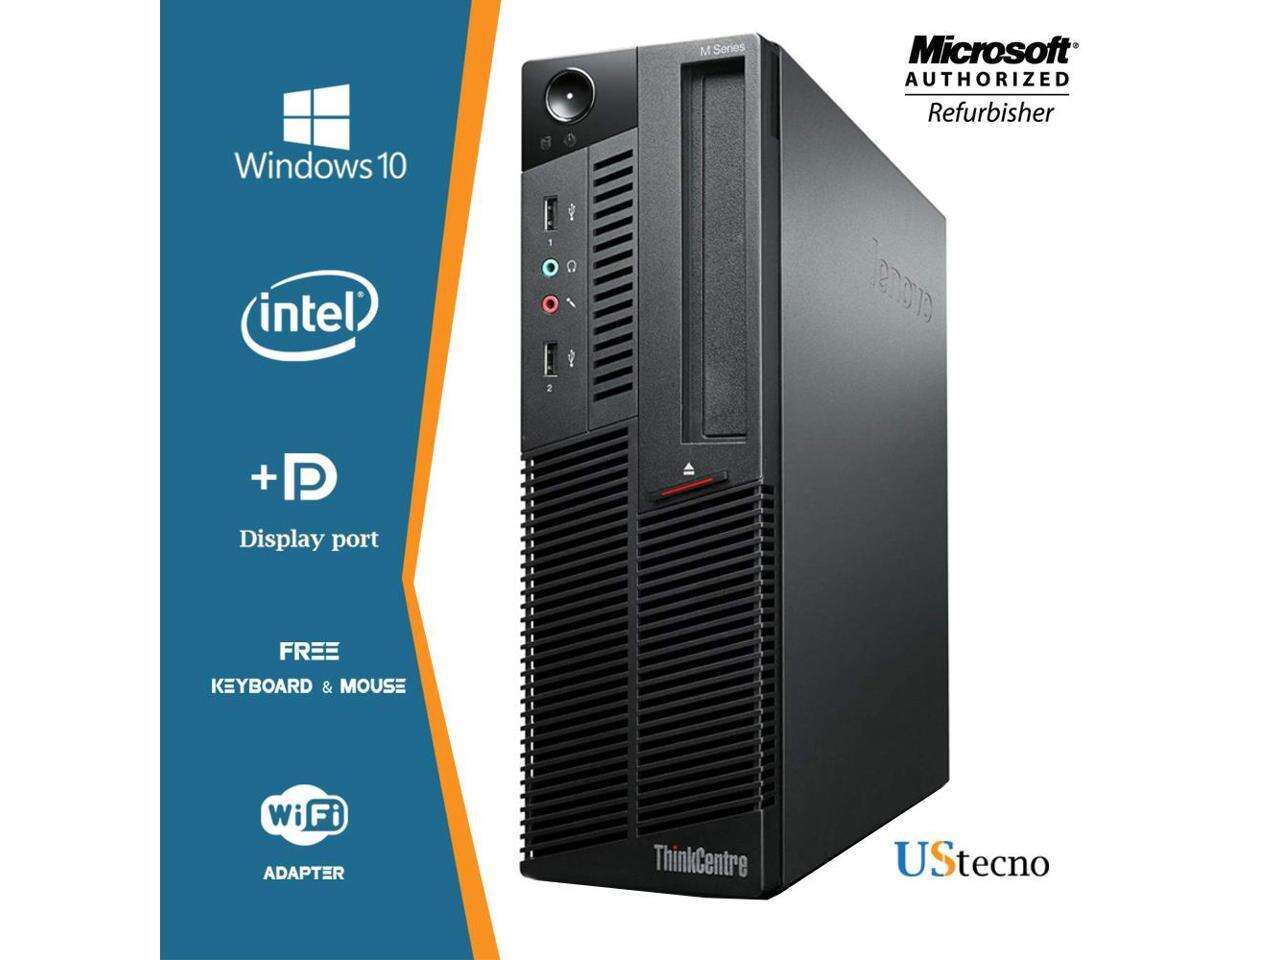 Lenovo ThinkCentre M90p SFF Desktop Computer Intel Core i5 650 (3.2GHz) 16GB DDR3 New 256GB SSD DVD Windows 10 Professional New Free Keyboard, Mouse,Power cord,WiFi Adapter